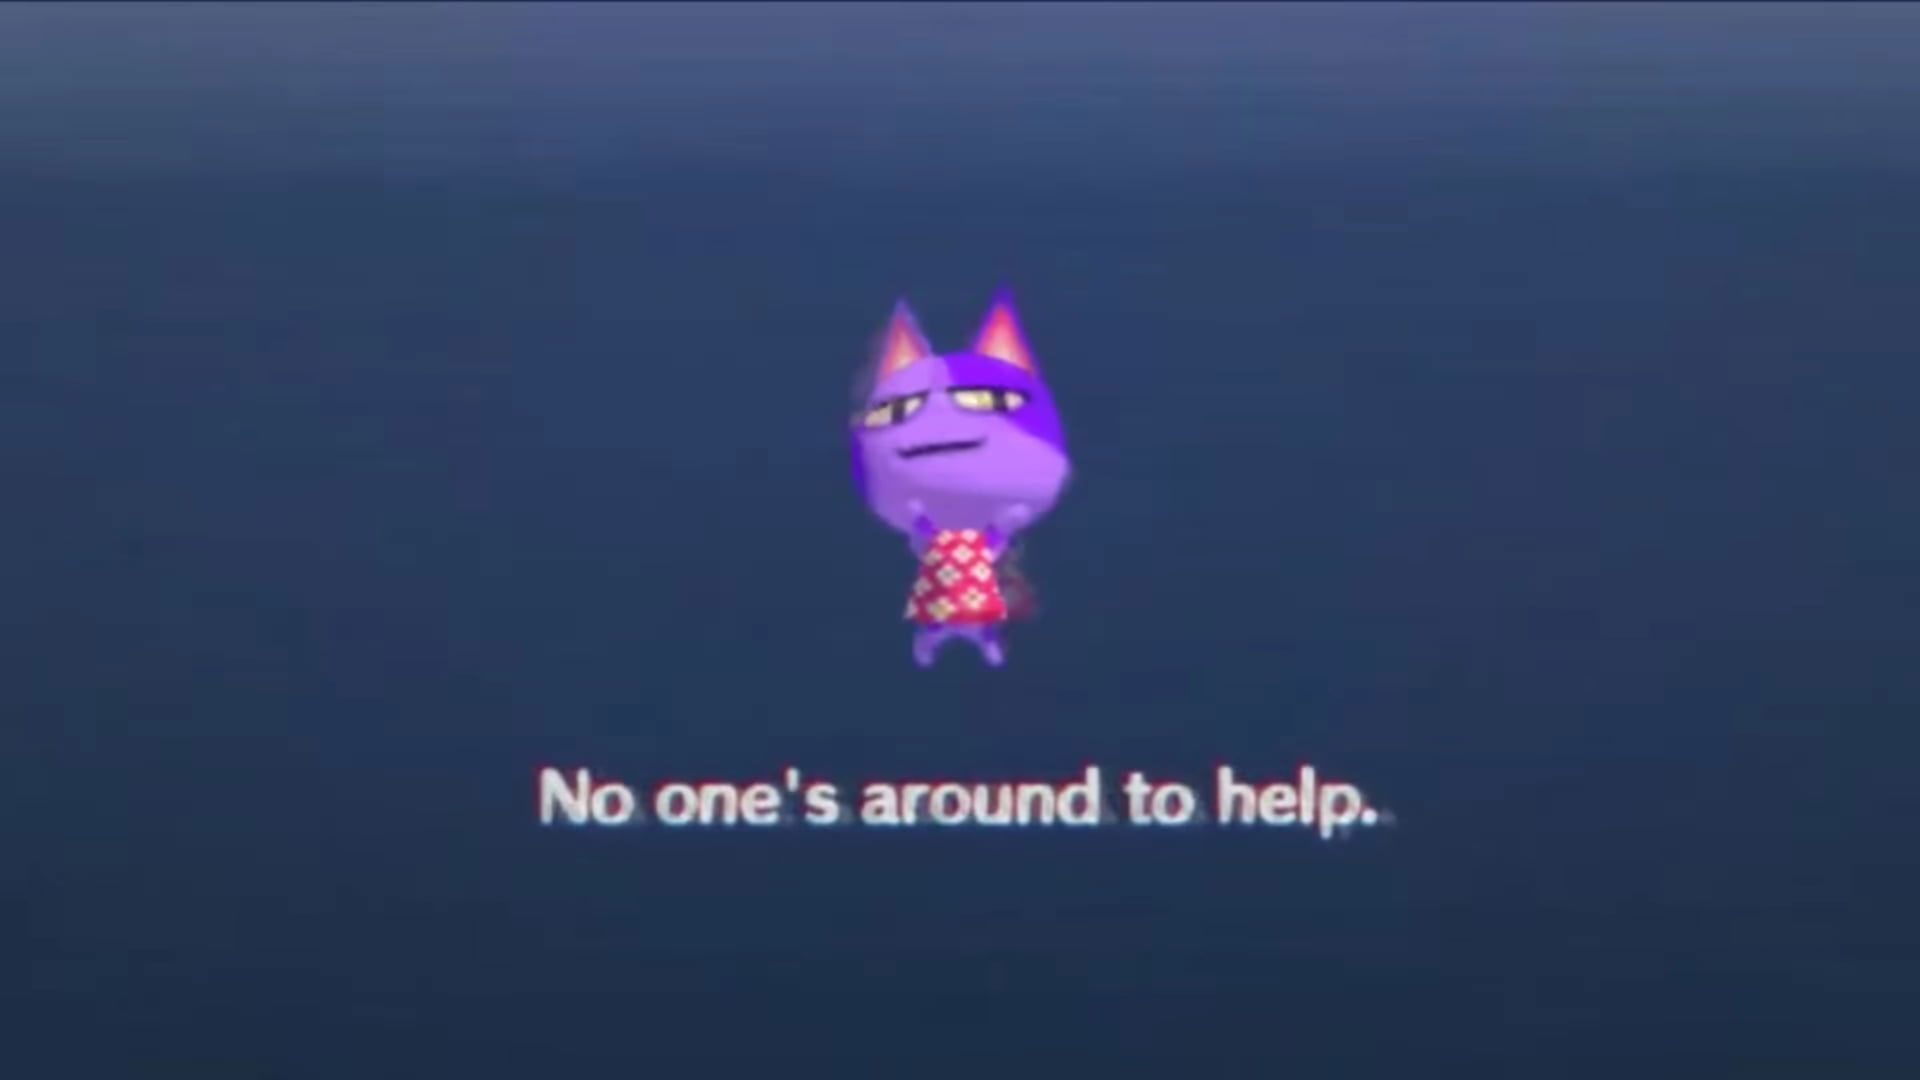 Animal crossing no one around to help - Animal Crossing